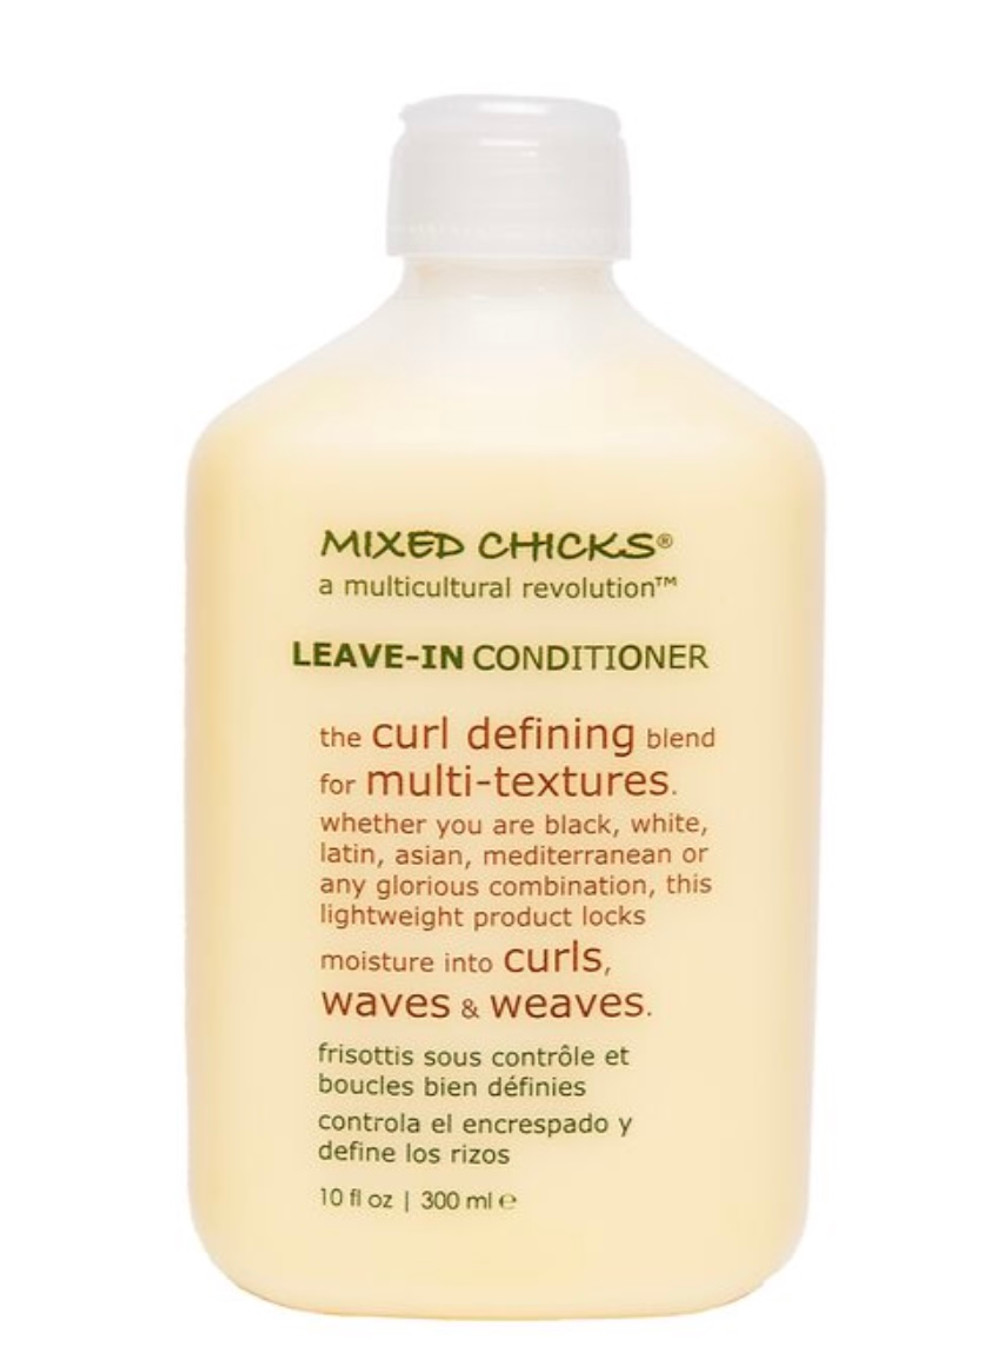 MIXED CHICKS Leave-in Conditioner